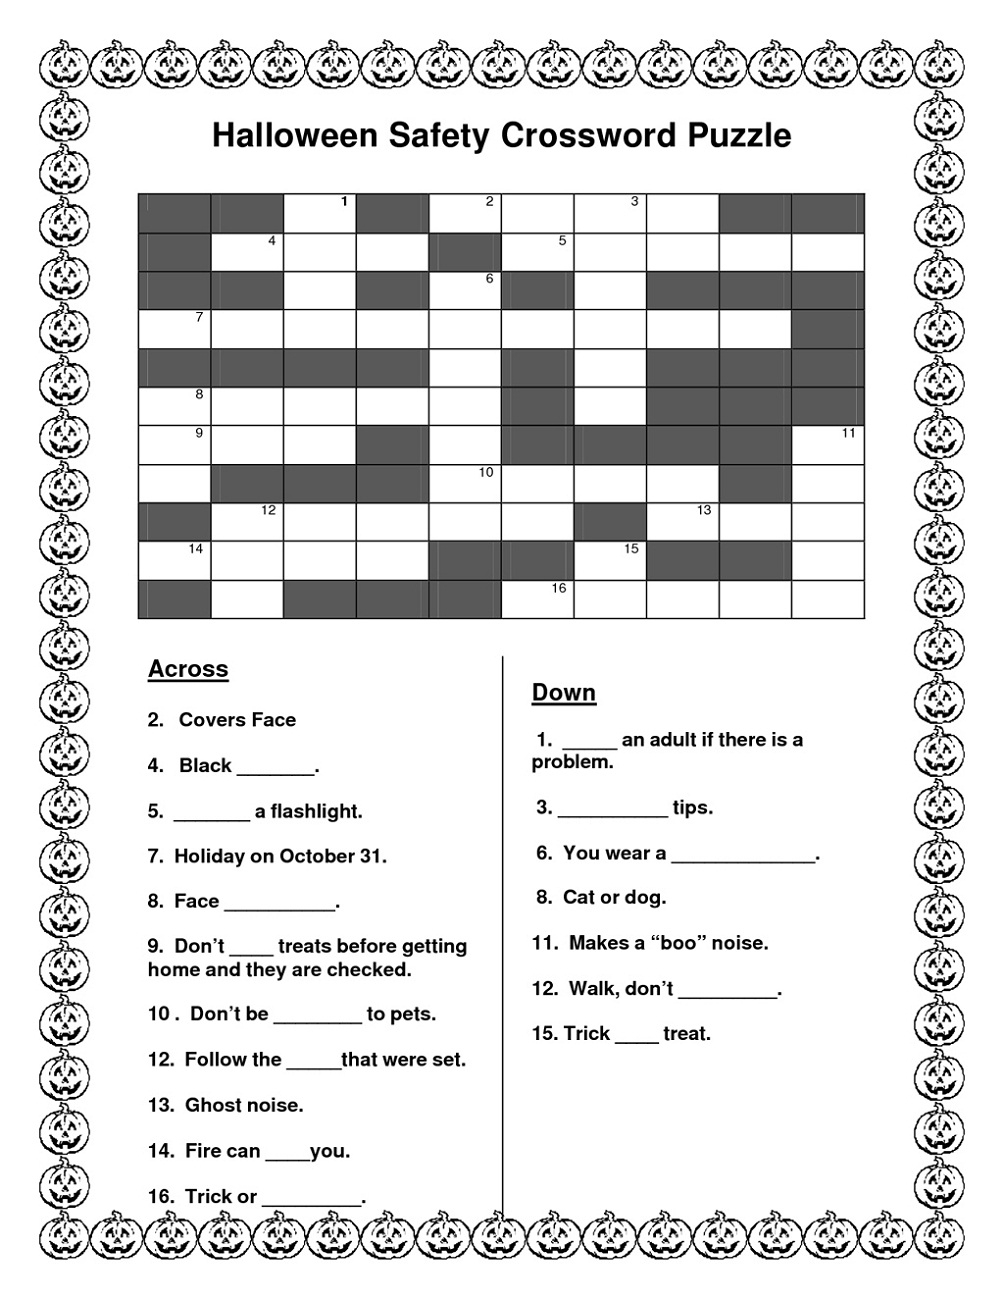 Free Crosswords For Kids | Activity Shelter - Free Printable Halloween Crossword Puzzles